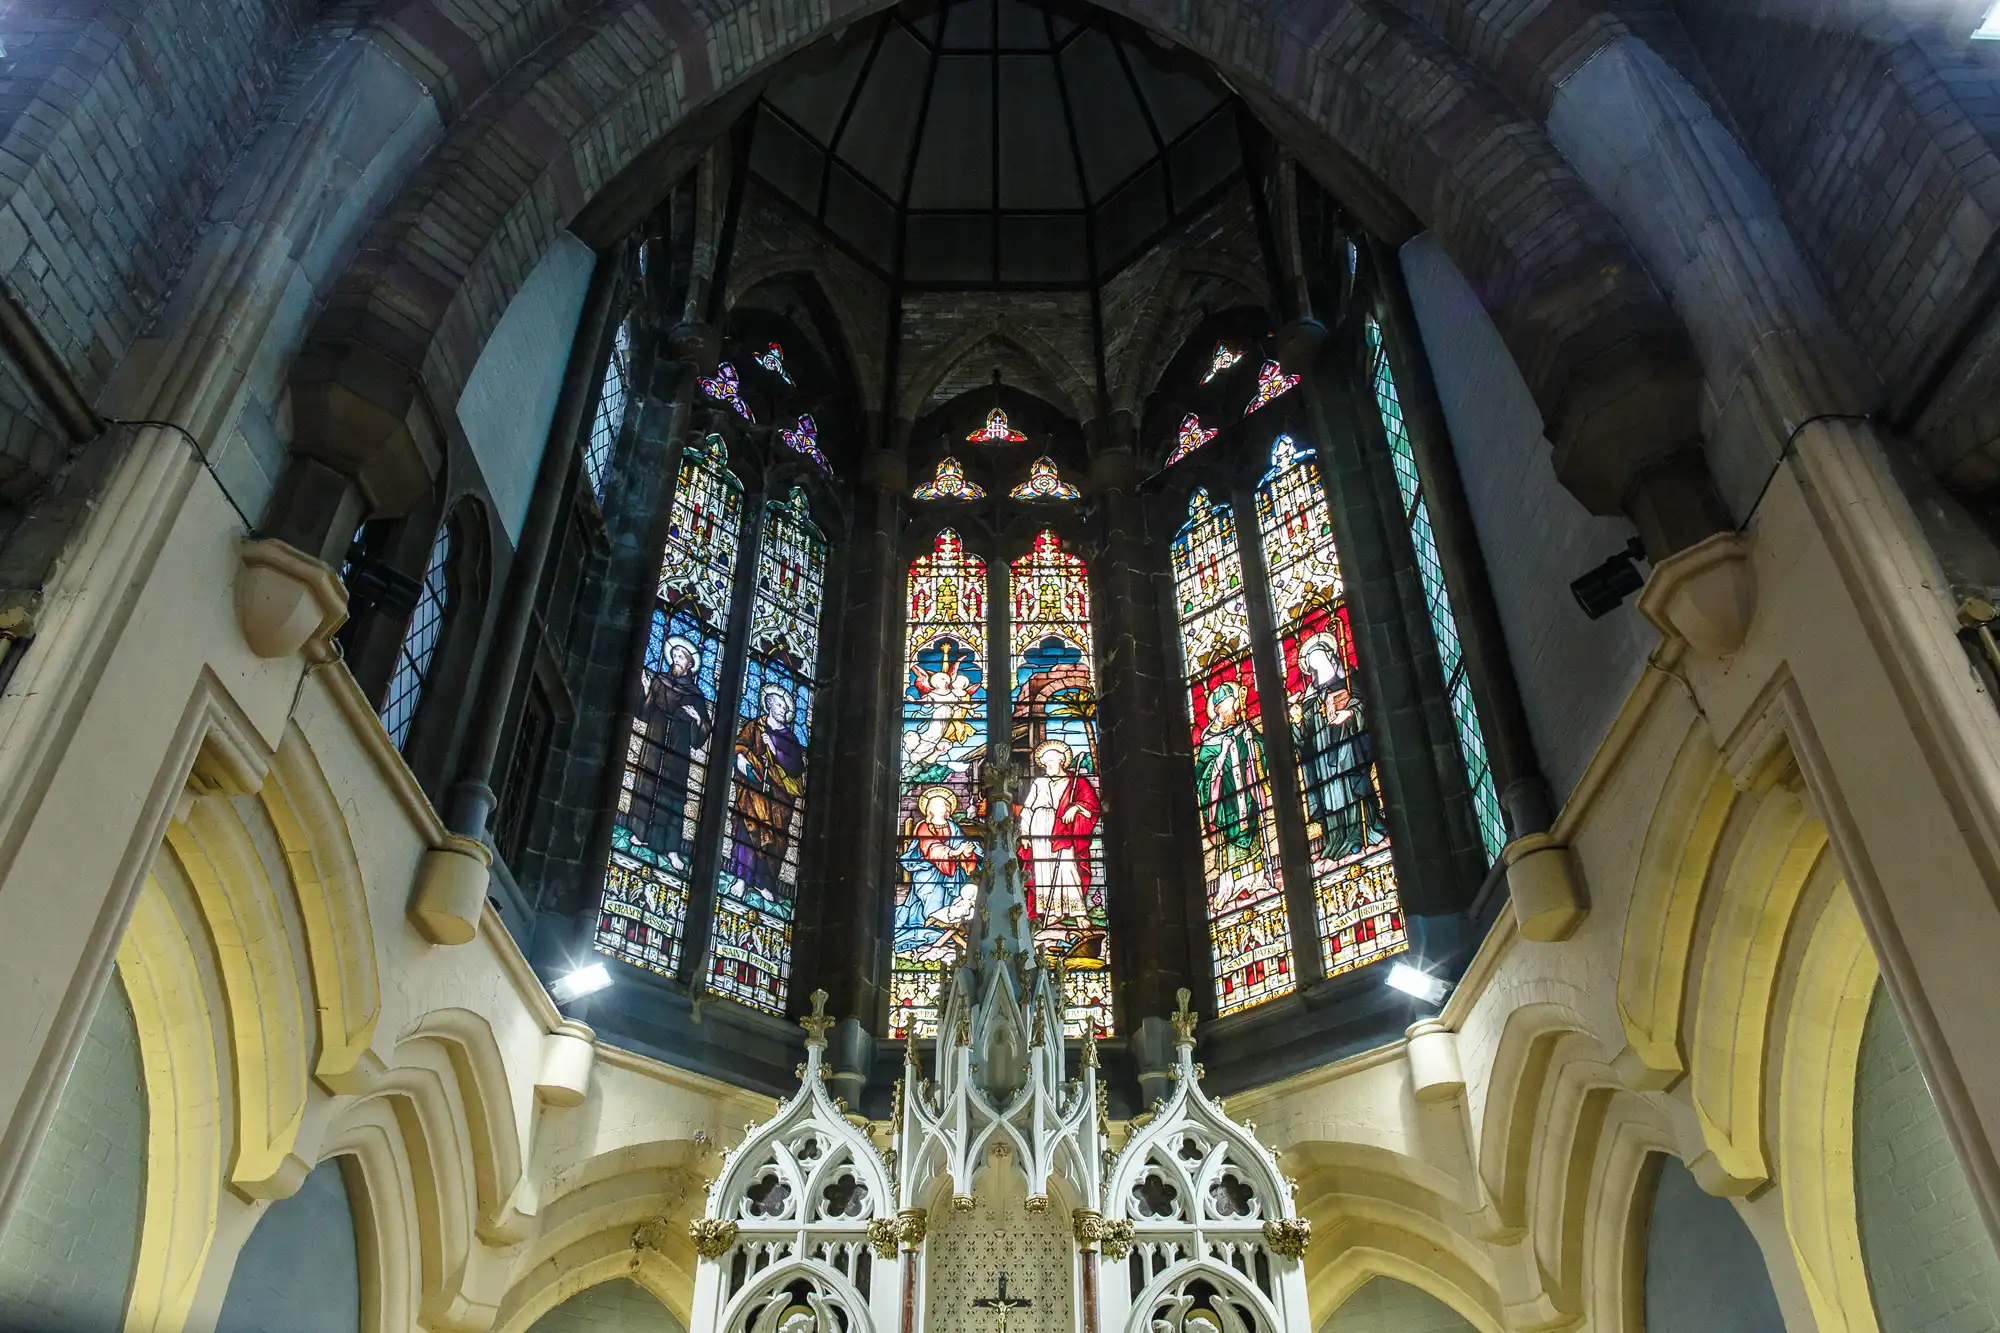 Interior of a gothic church showing ornate stained glass windows and elaborate stone arches.